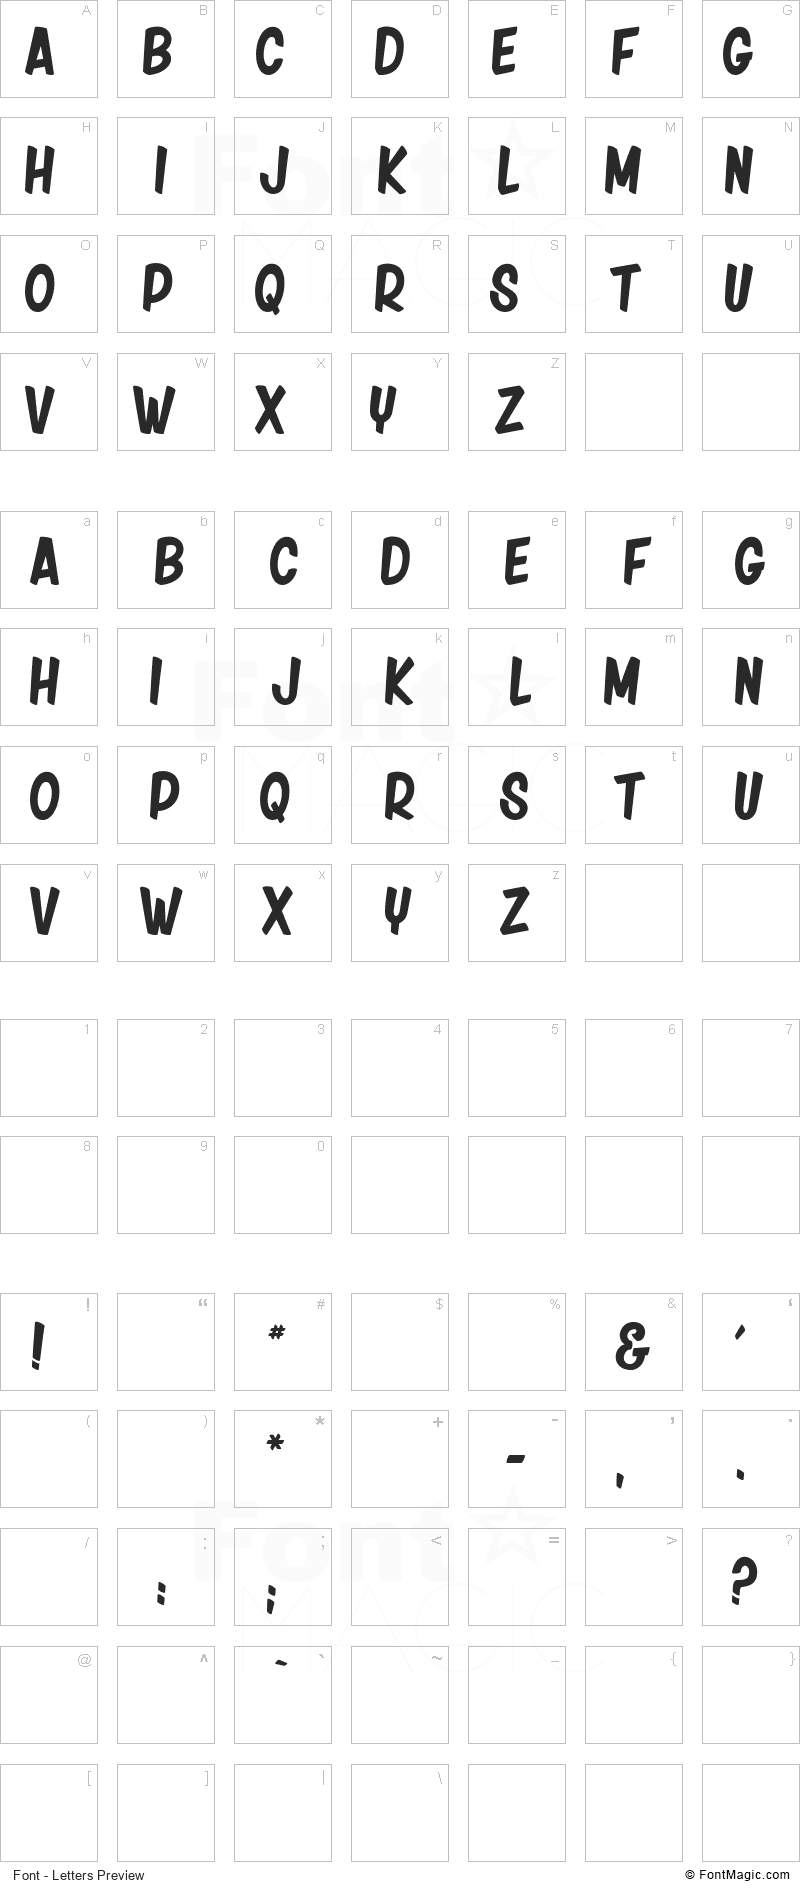 Friday Night Font - All Latters Preview Chart